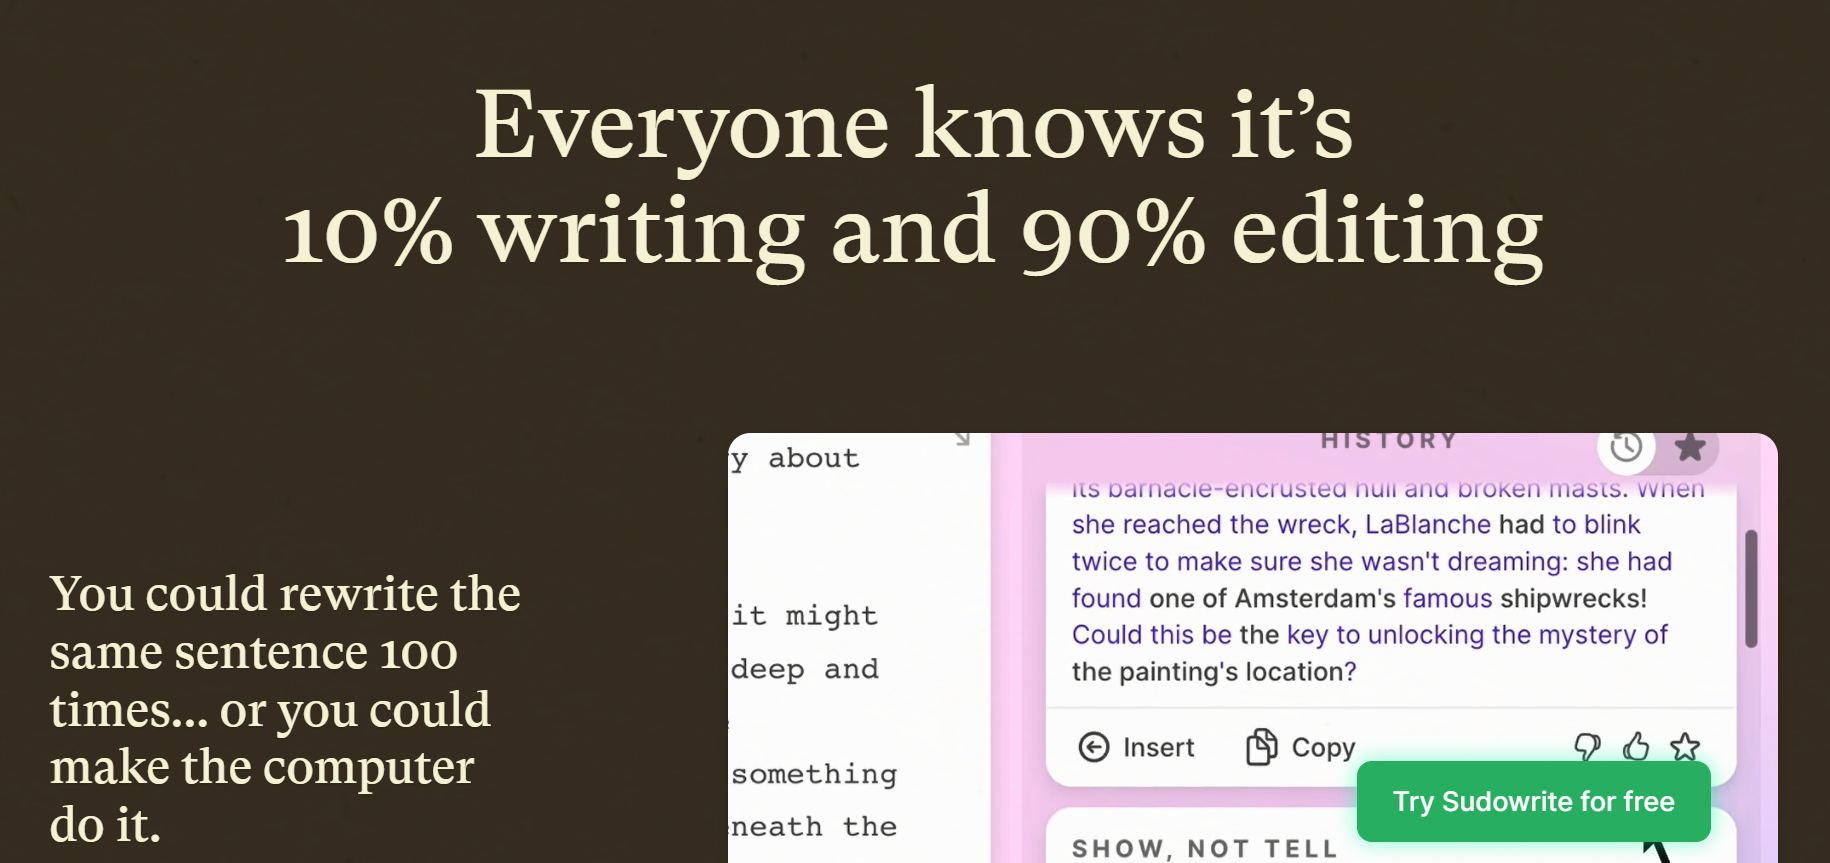 Sudowrite Landing Page - "Everyone knows it's 10% writing and 90% editing" 